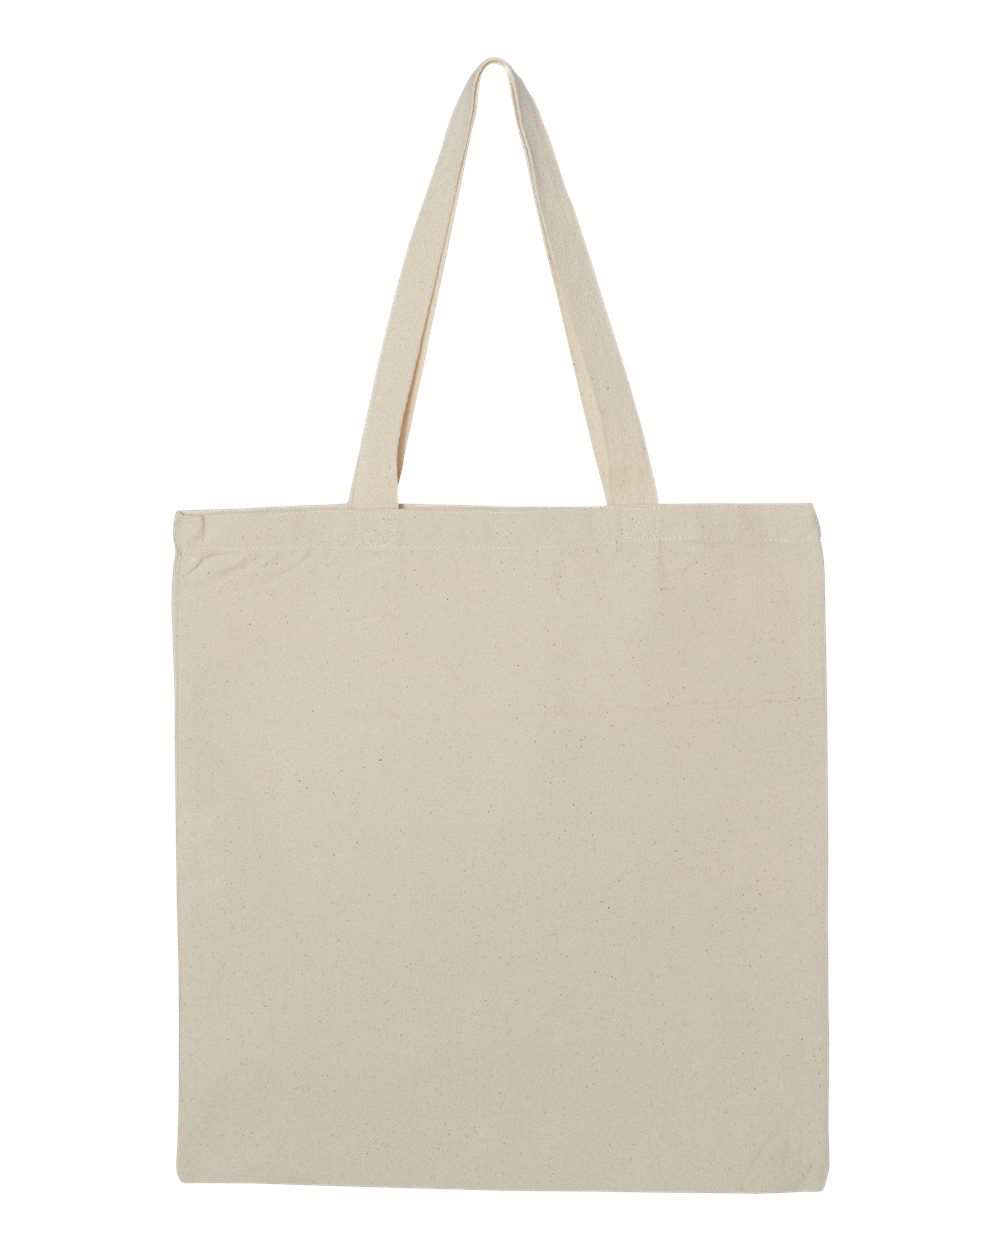 Q-tees Q800 Promotional Tote - Black - One Size